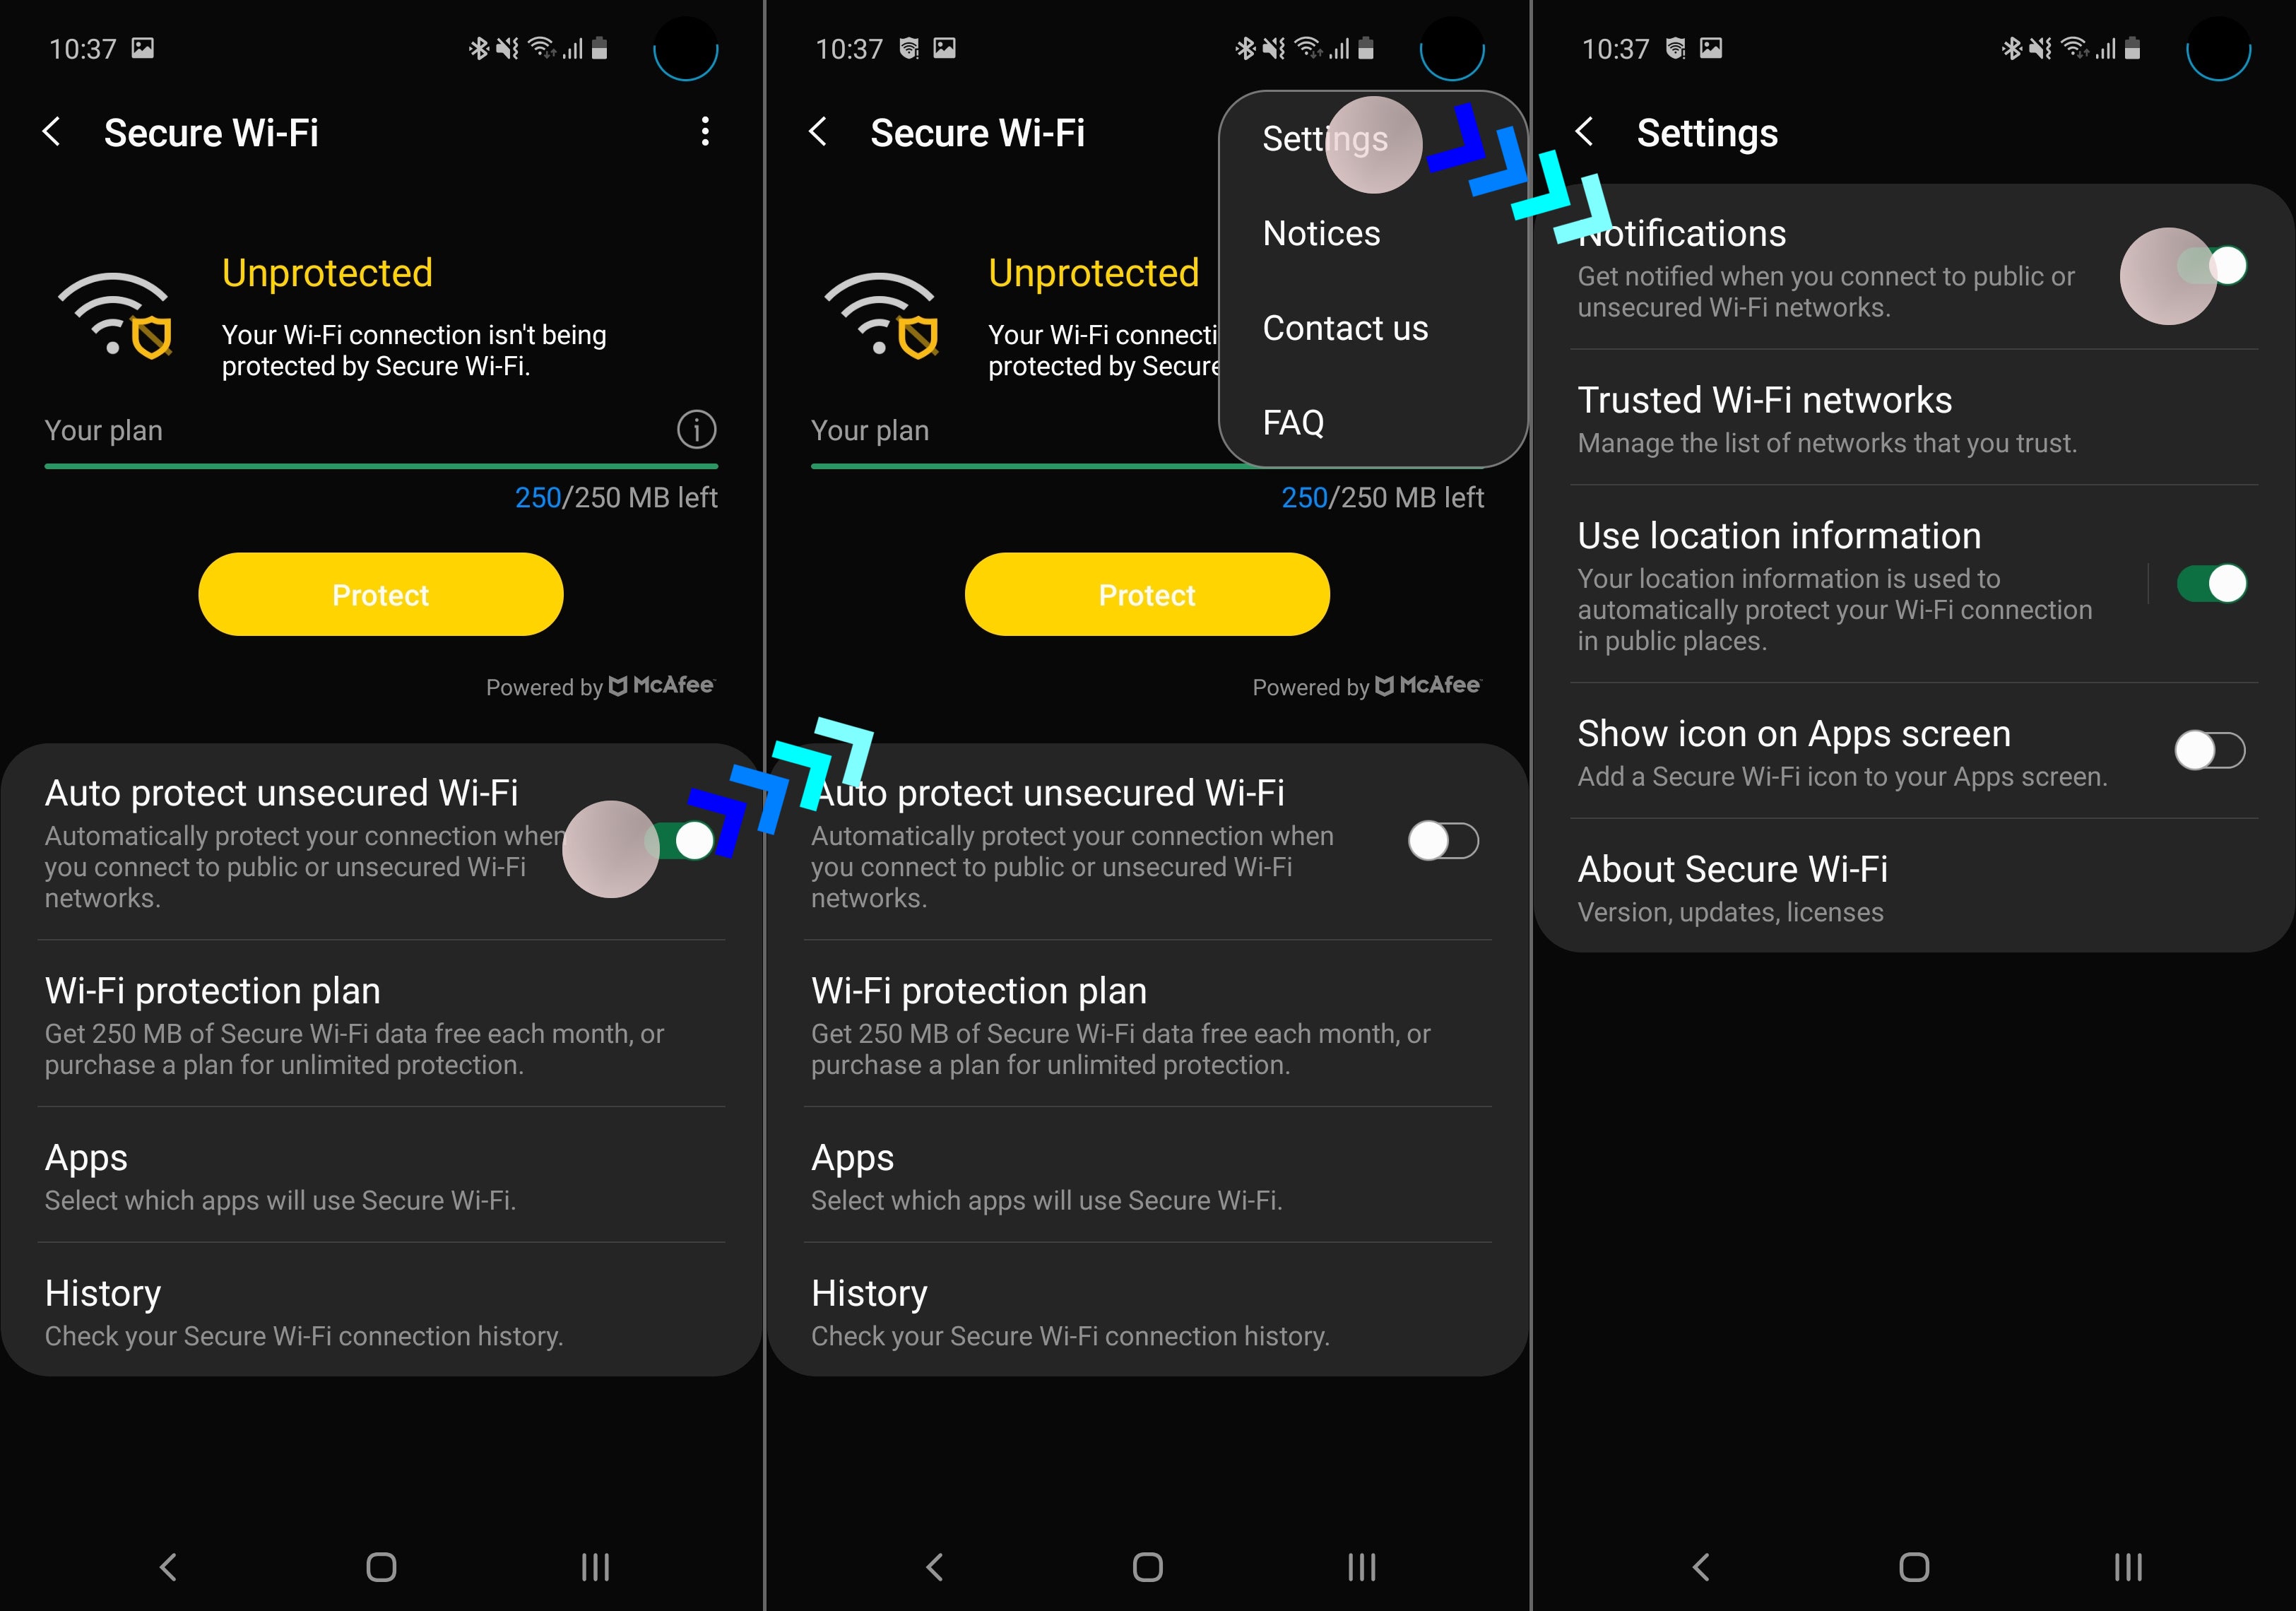 How to disable the annoying Secure Wi-Fi on the Samsung Galaxy S10